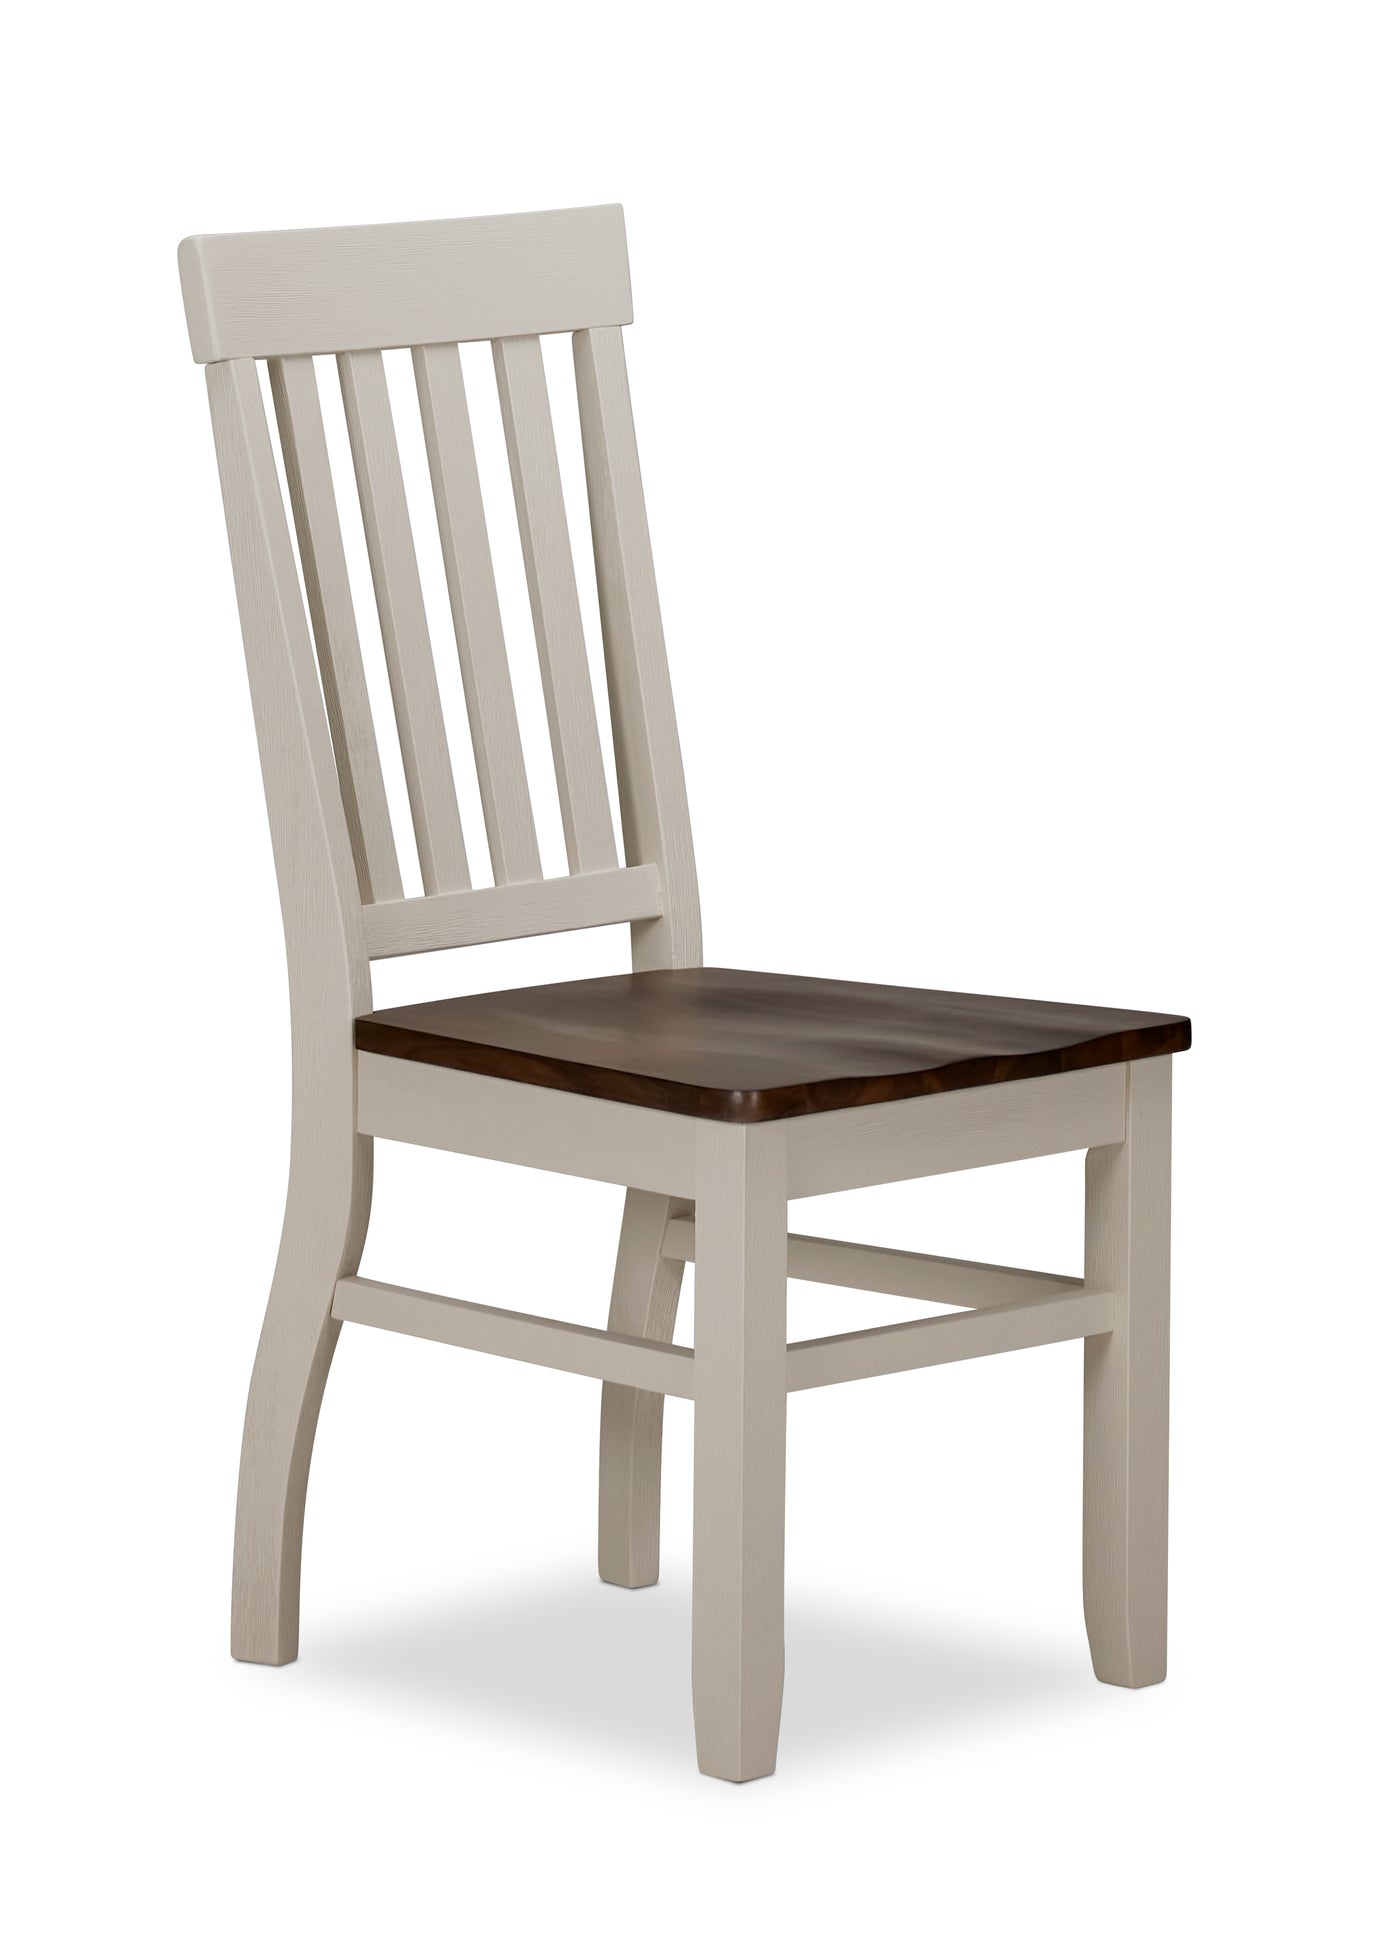 Caylie Dining Chair - Ivory, Driftwood